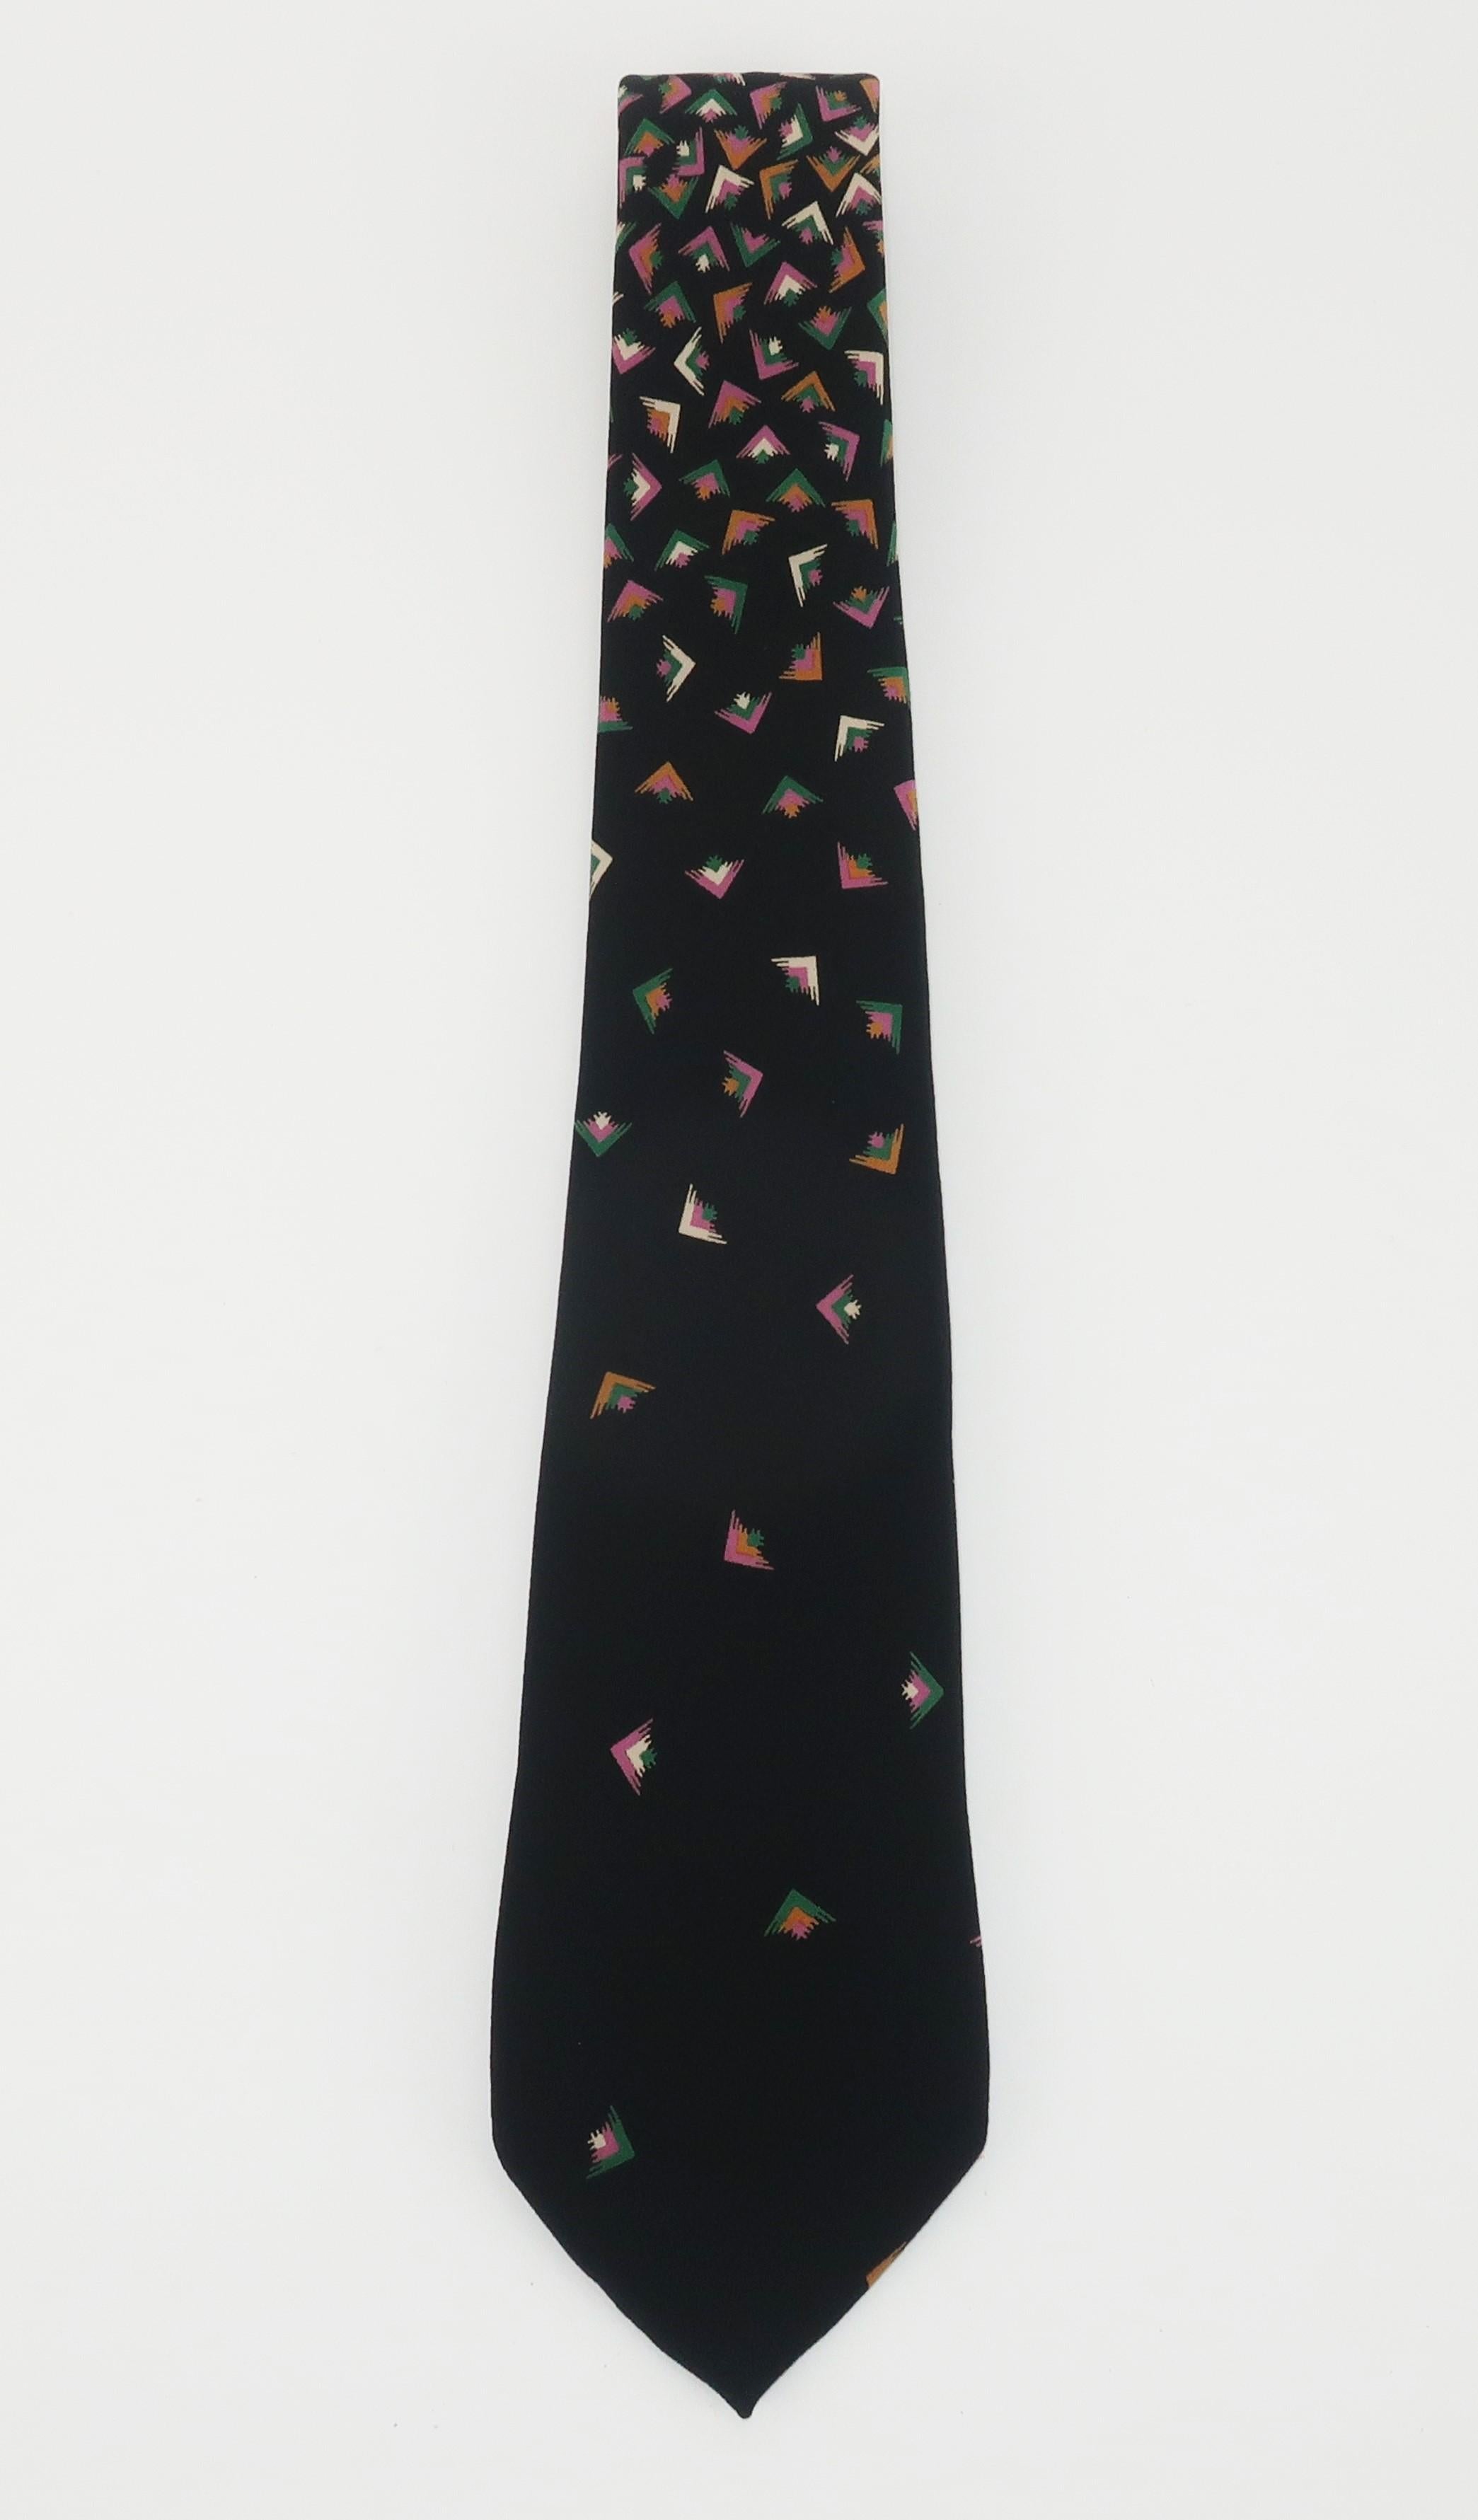 Chloe back silk men's neck tie with a geometric confetti style print in shades of orchid, green, white and cognac.  Originally retailed at I. Magnin.  Hand made in Spain.
CONDITION
Very good condition.  Professionally cleaned and ready for